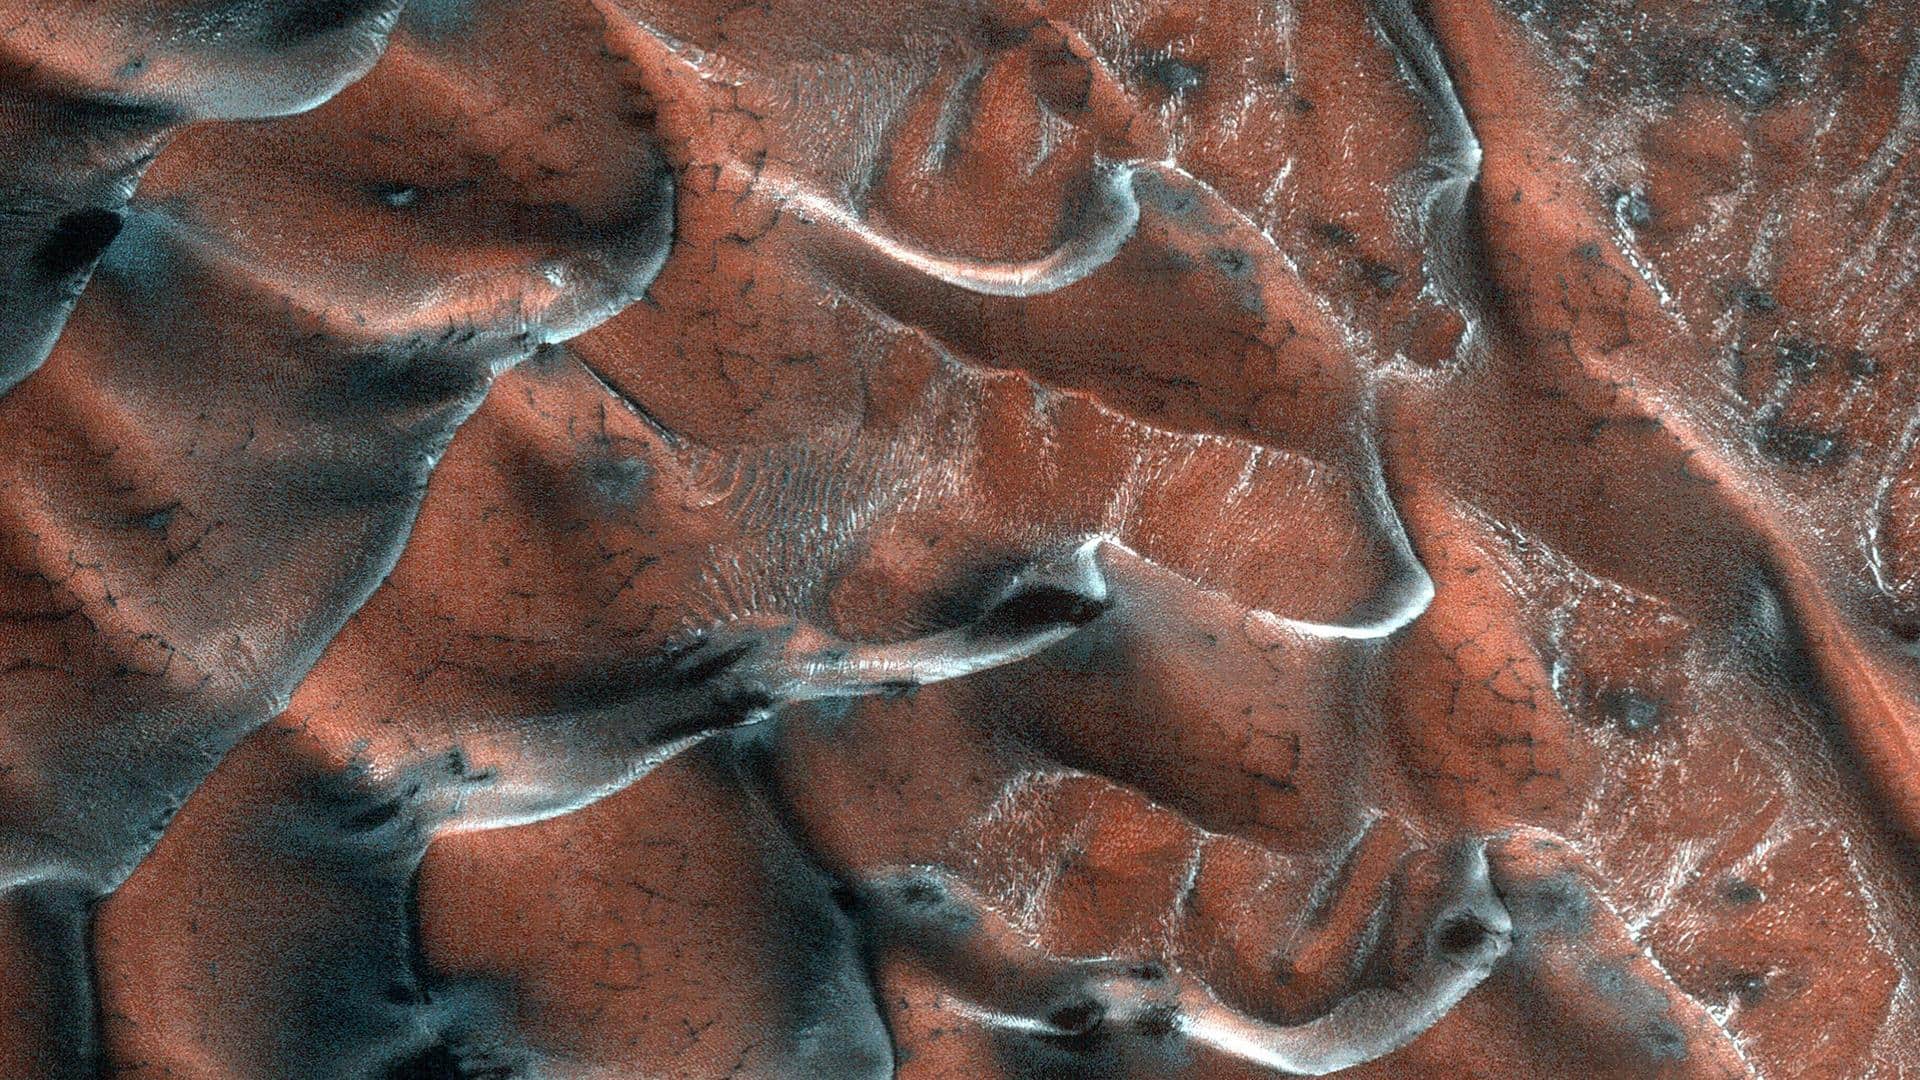 How do Martian sand dunes differ from those on Earth